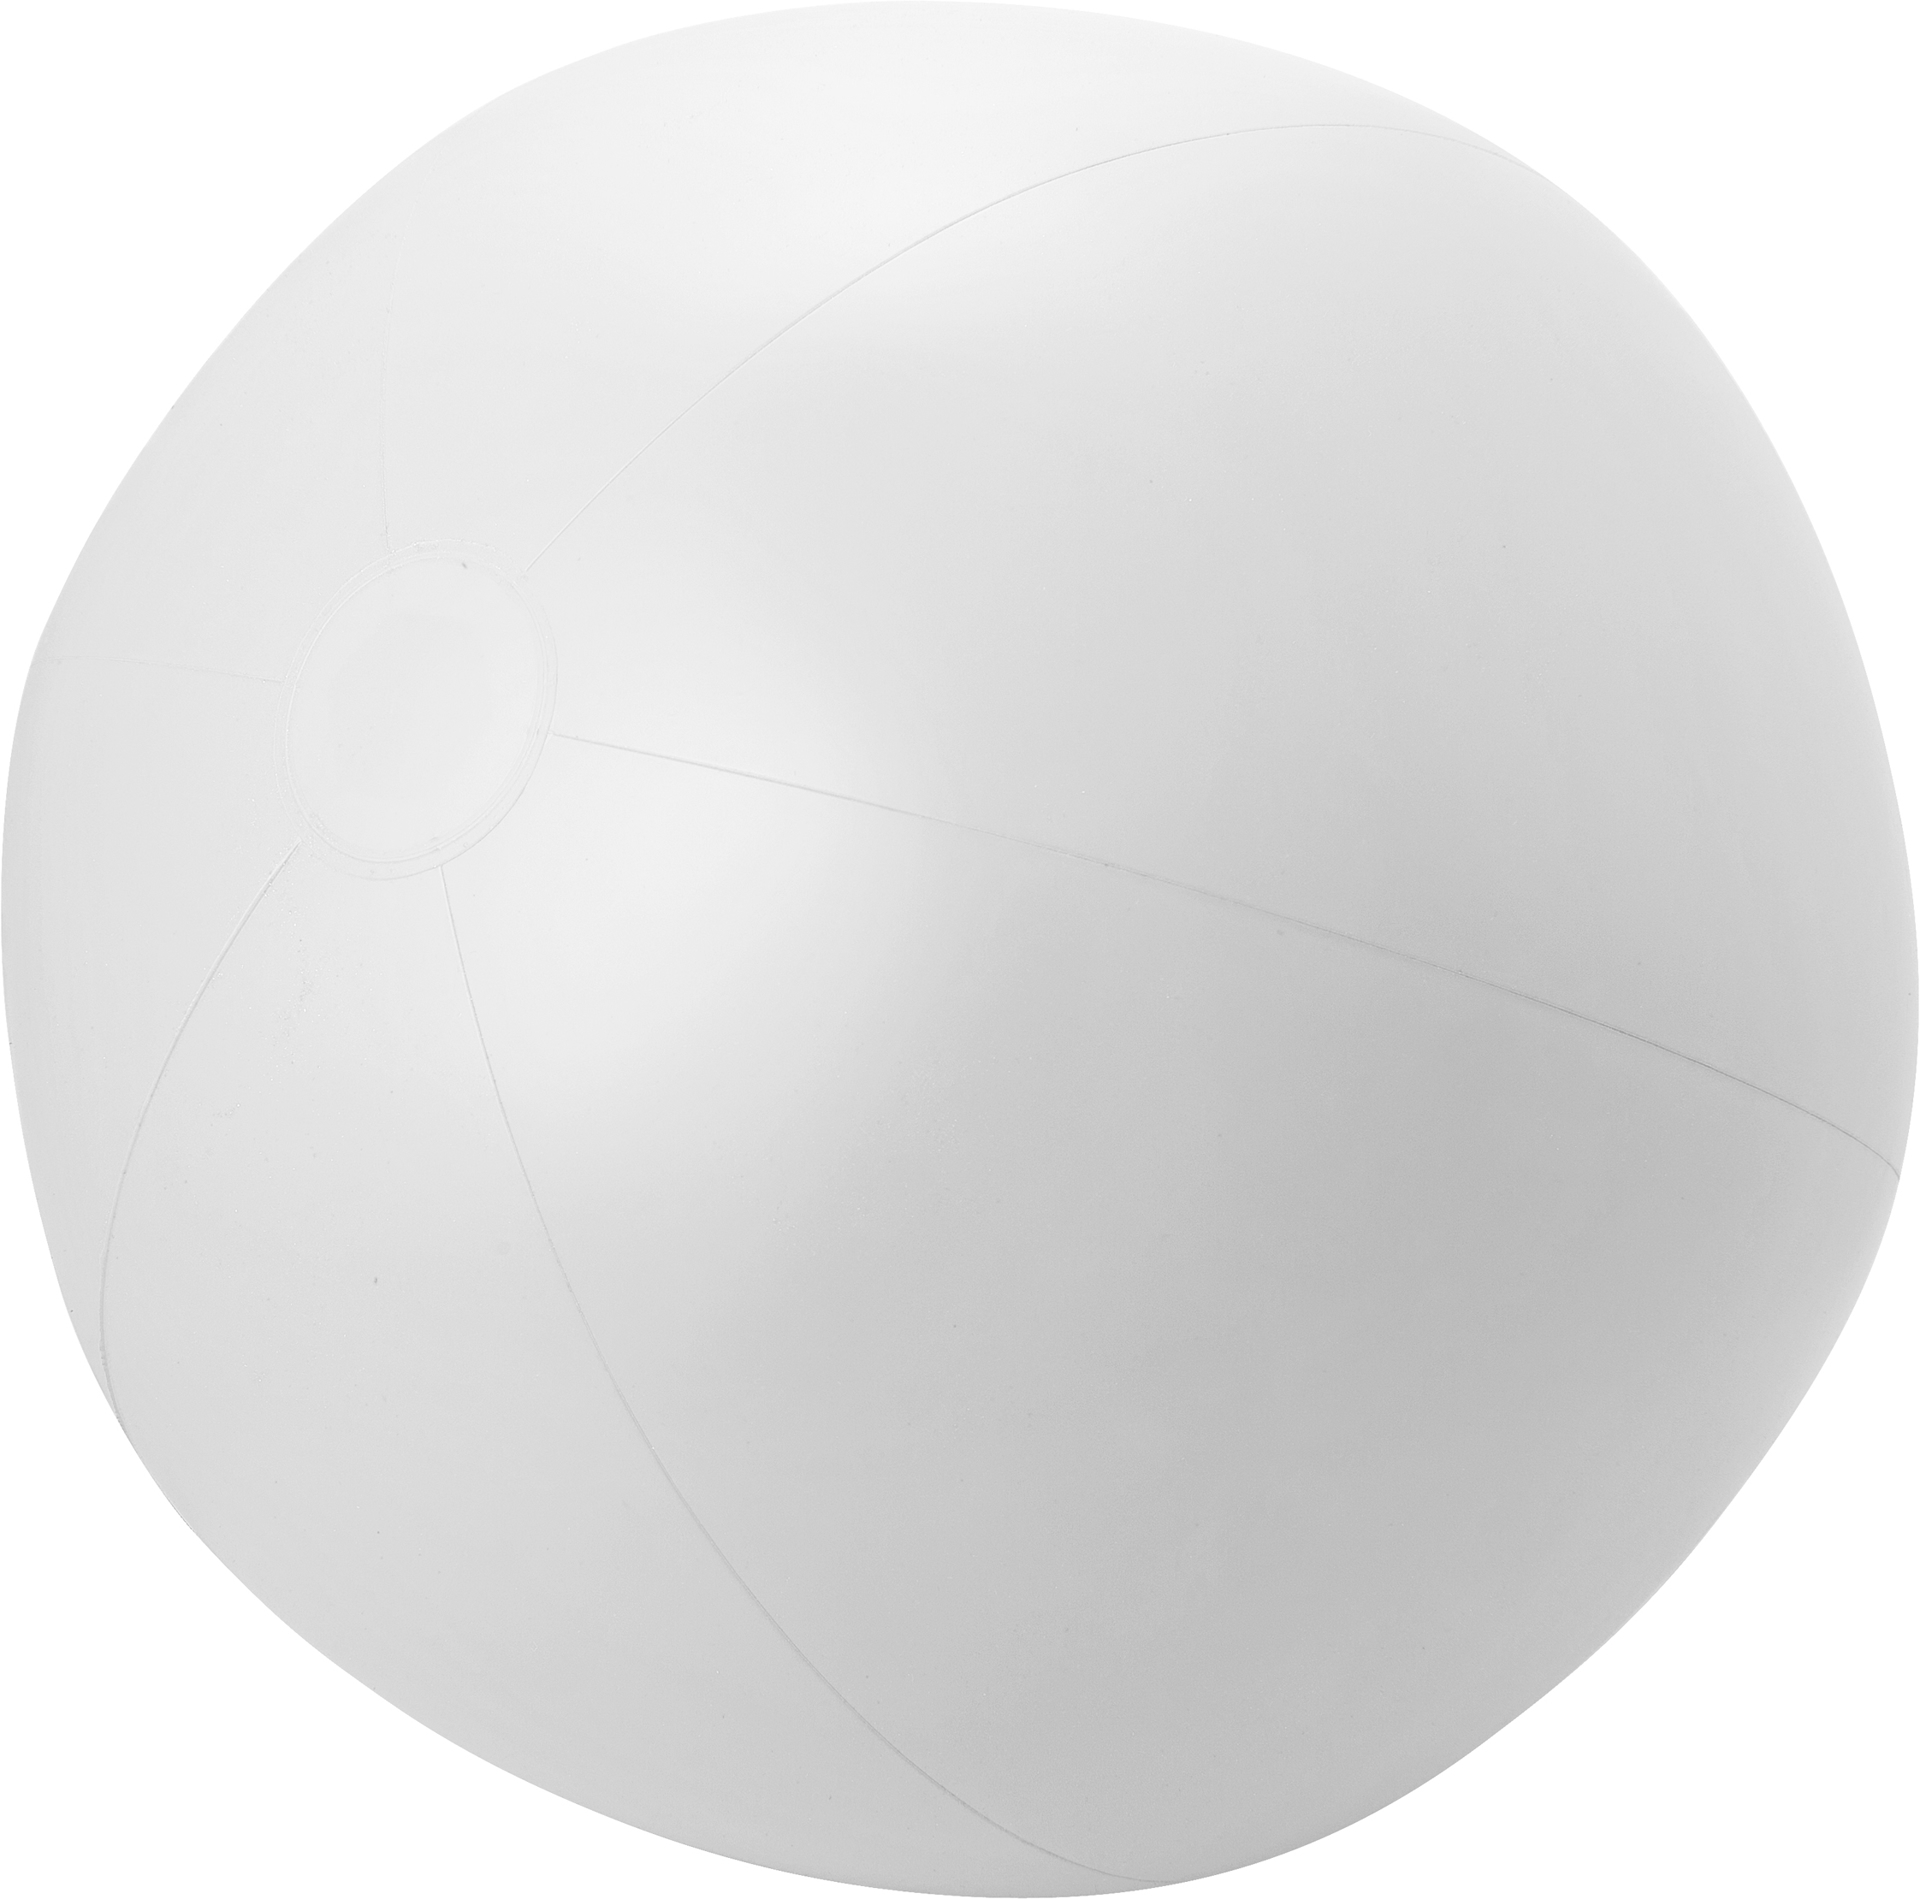 Extra Large Beach Ball in white